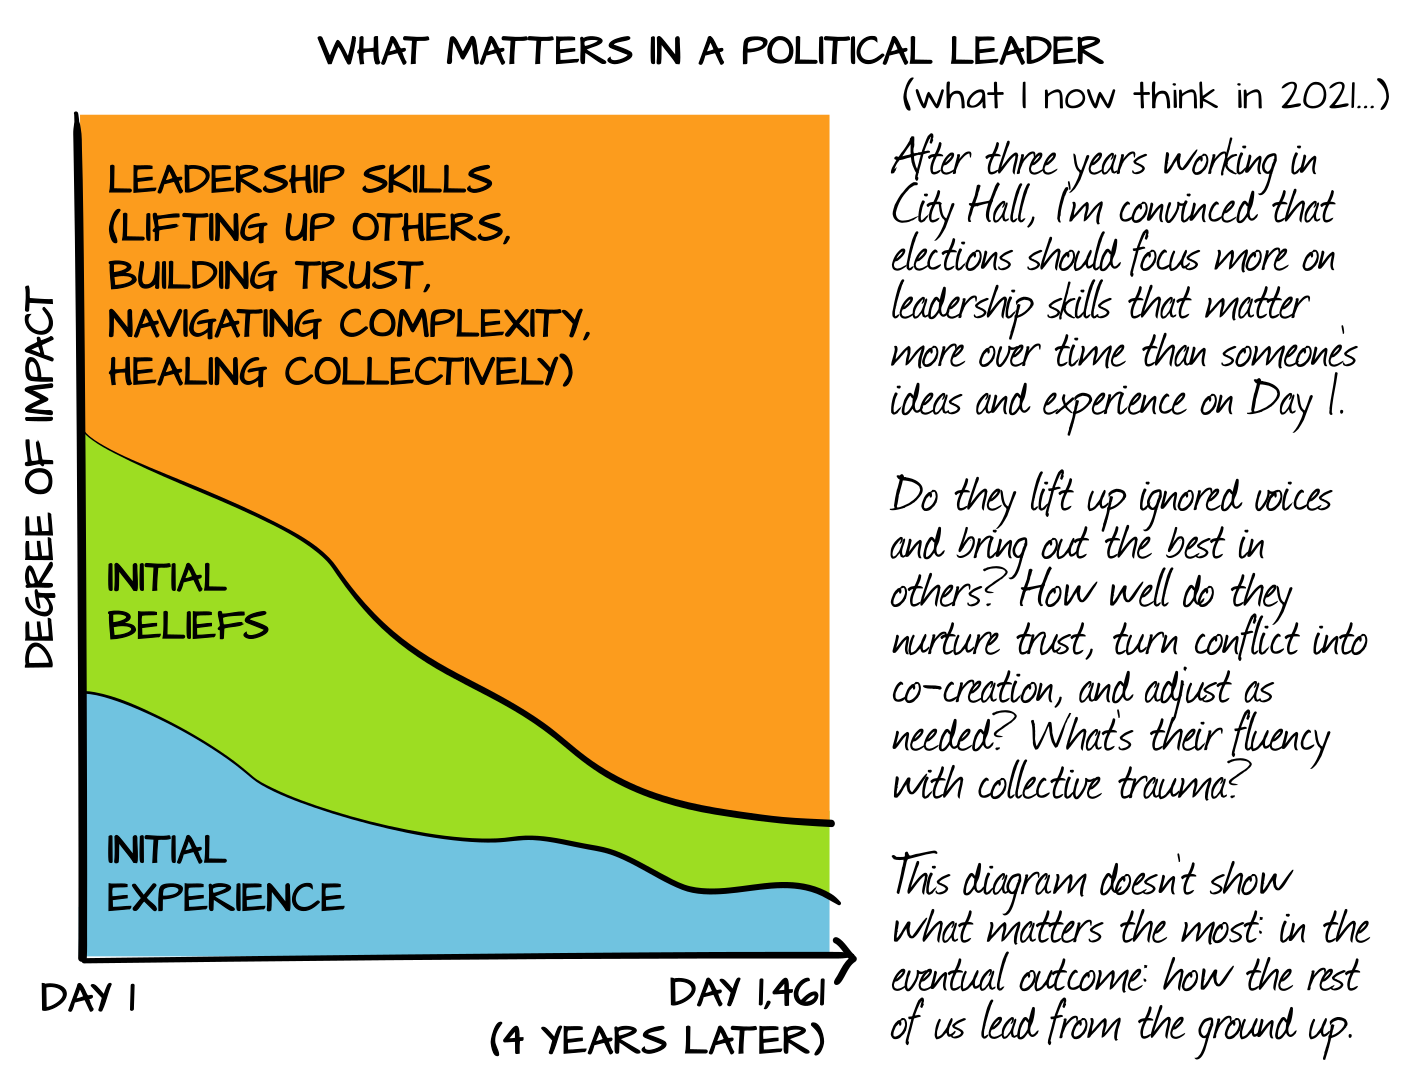 What Matters in a Political Leader, 2021